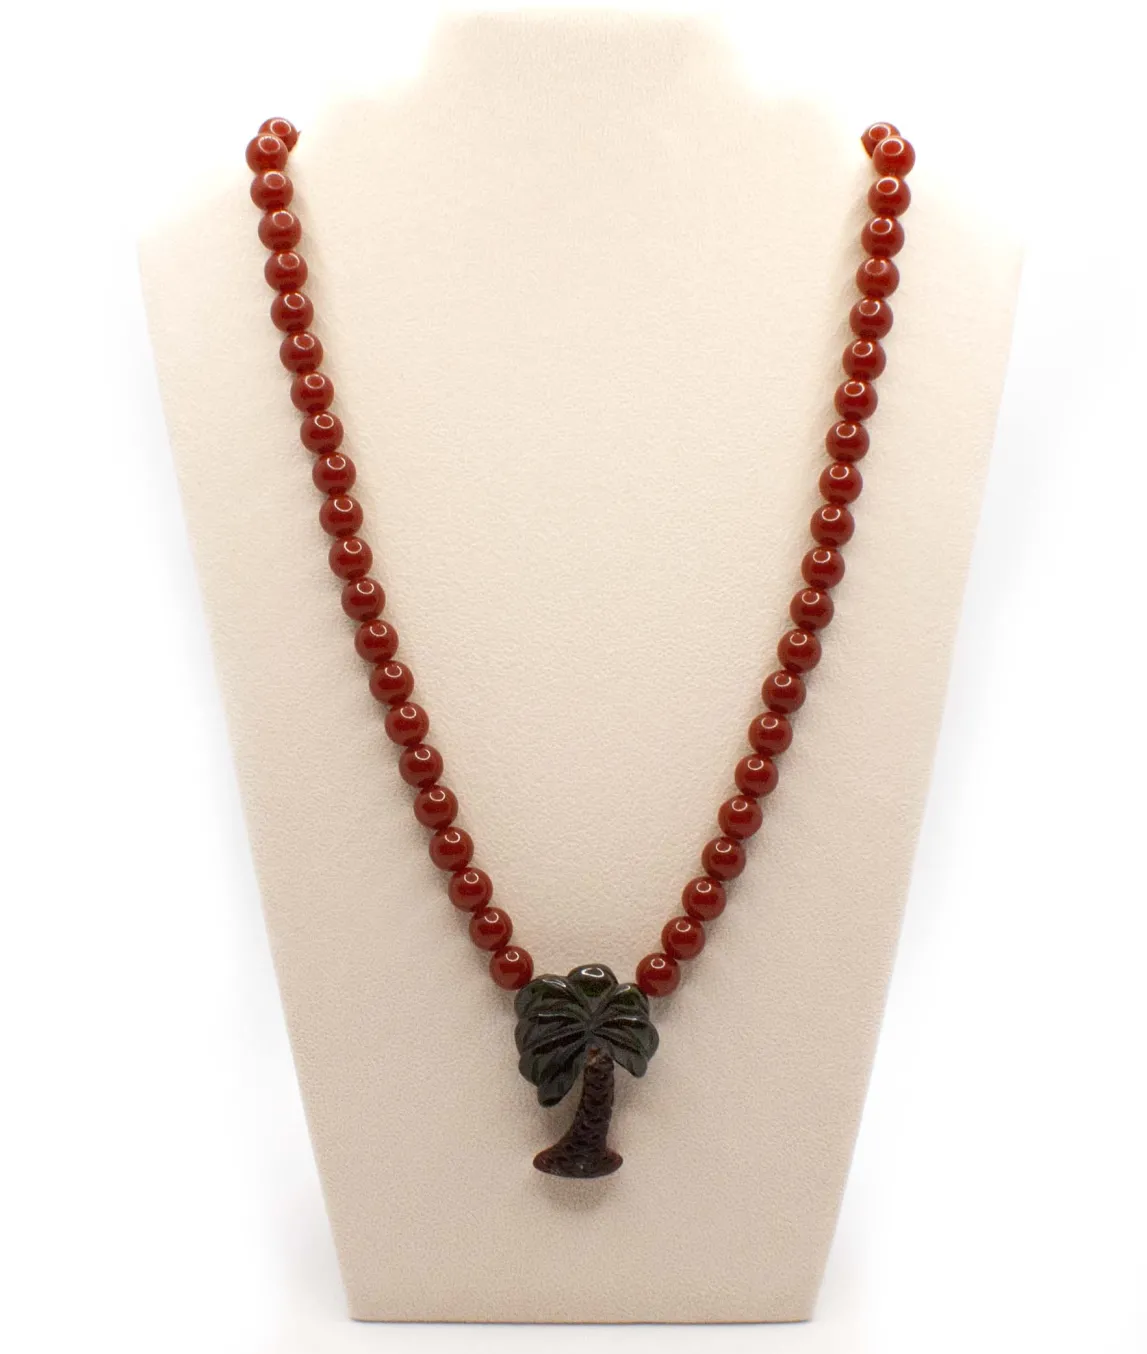 Vintage plastic beaded necklace with palm tree pendant